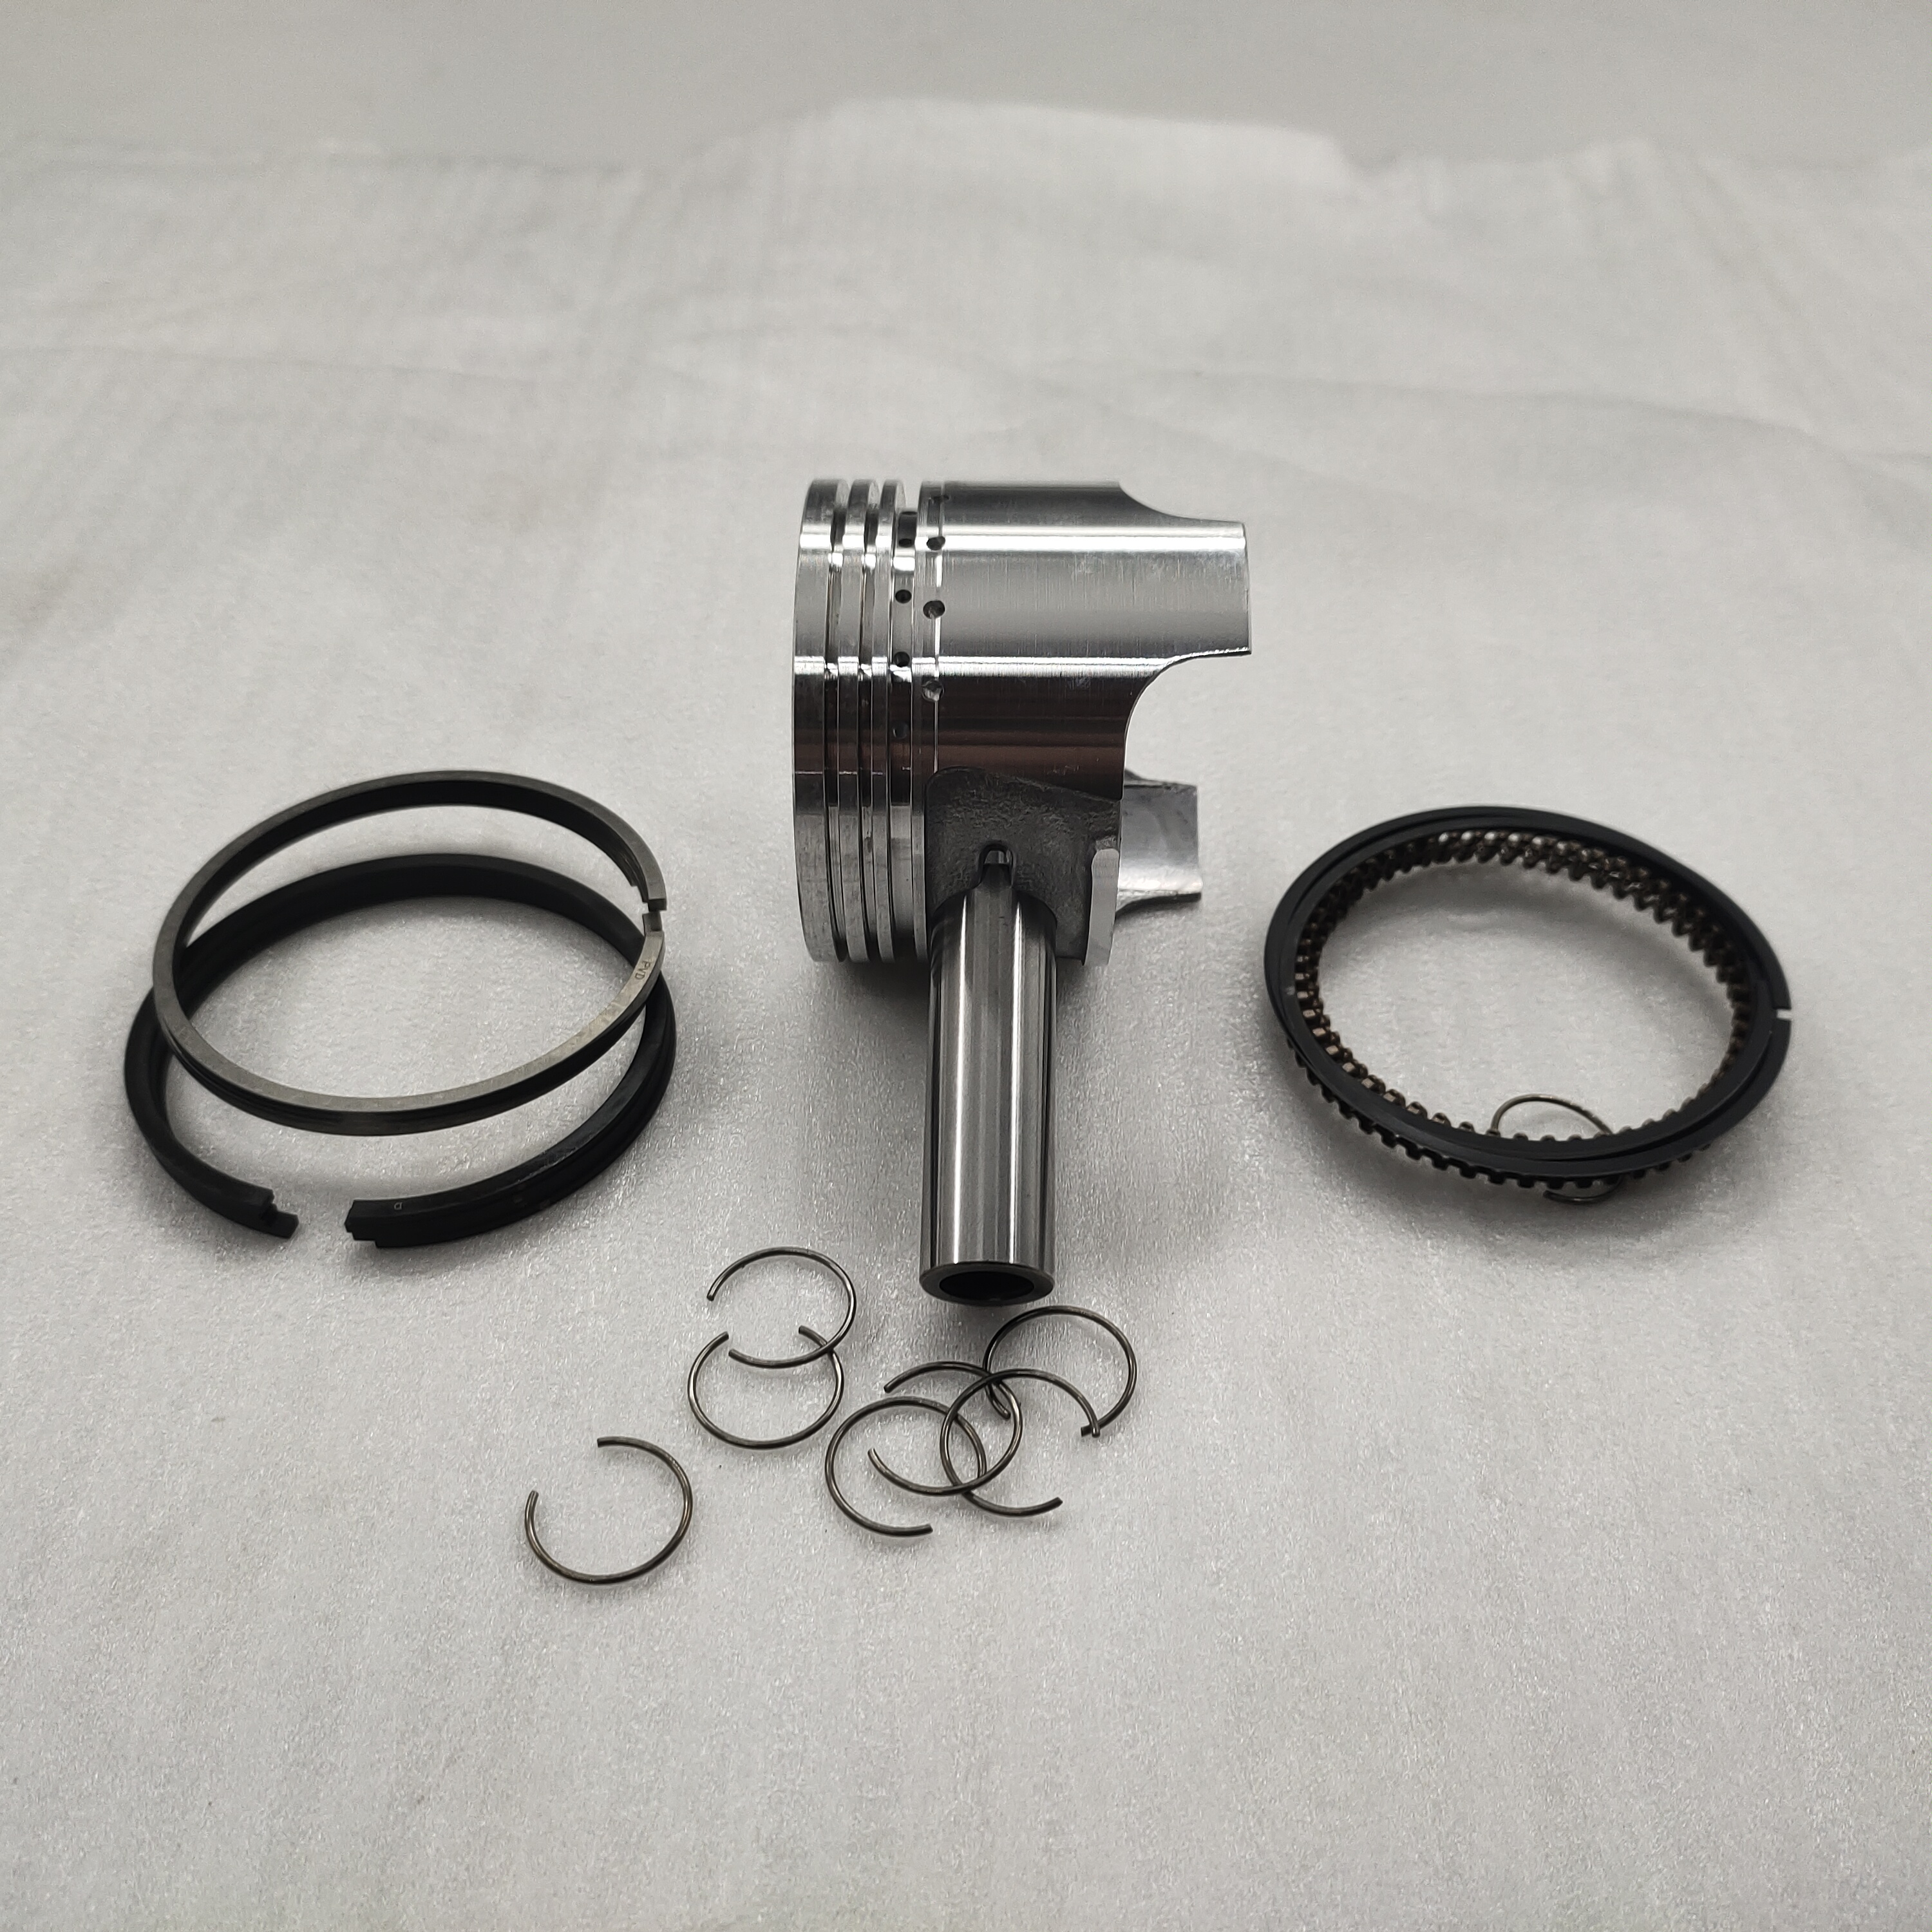 Dayang Tricycle Parts High-quality 800cc Engine Parts Piston Assembly Piston Pin Piston Ring Circlip